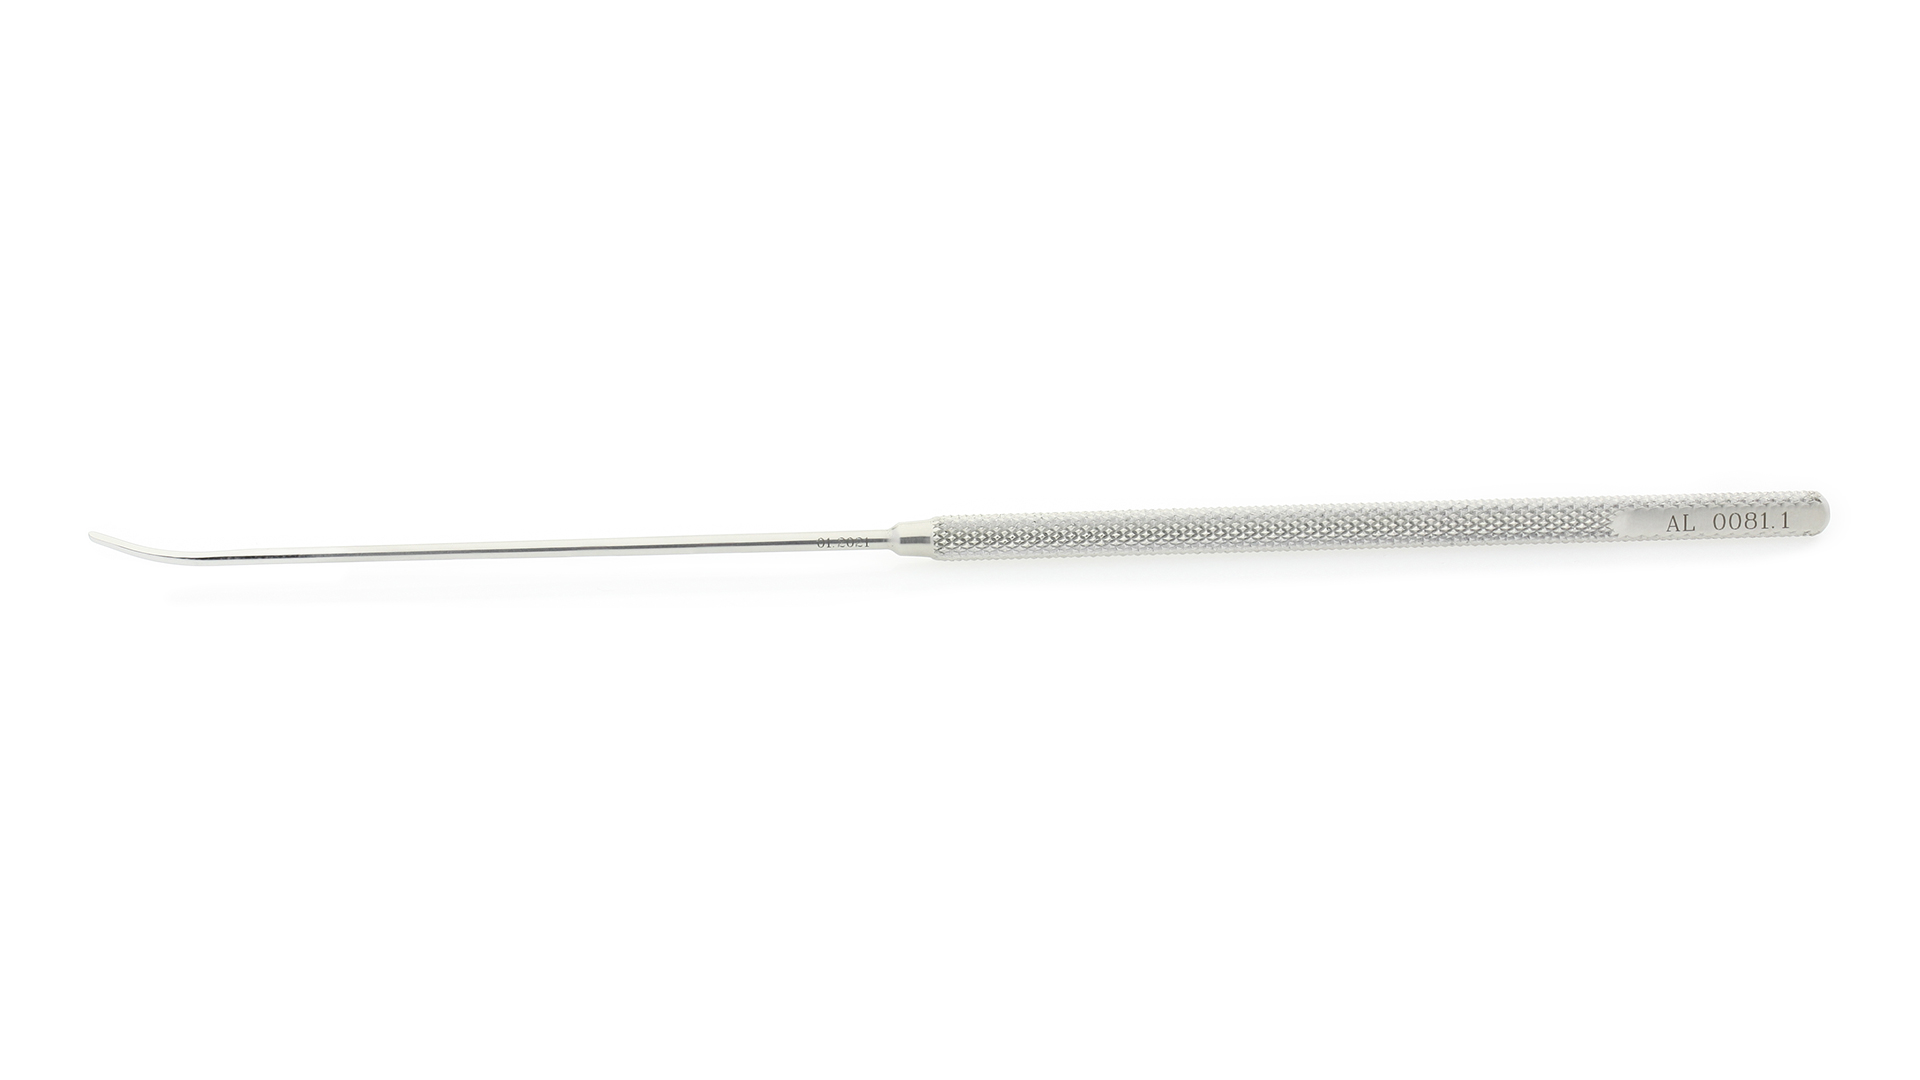 Spatula Dissector - 1.75mm tip